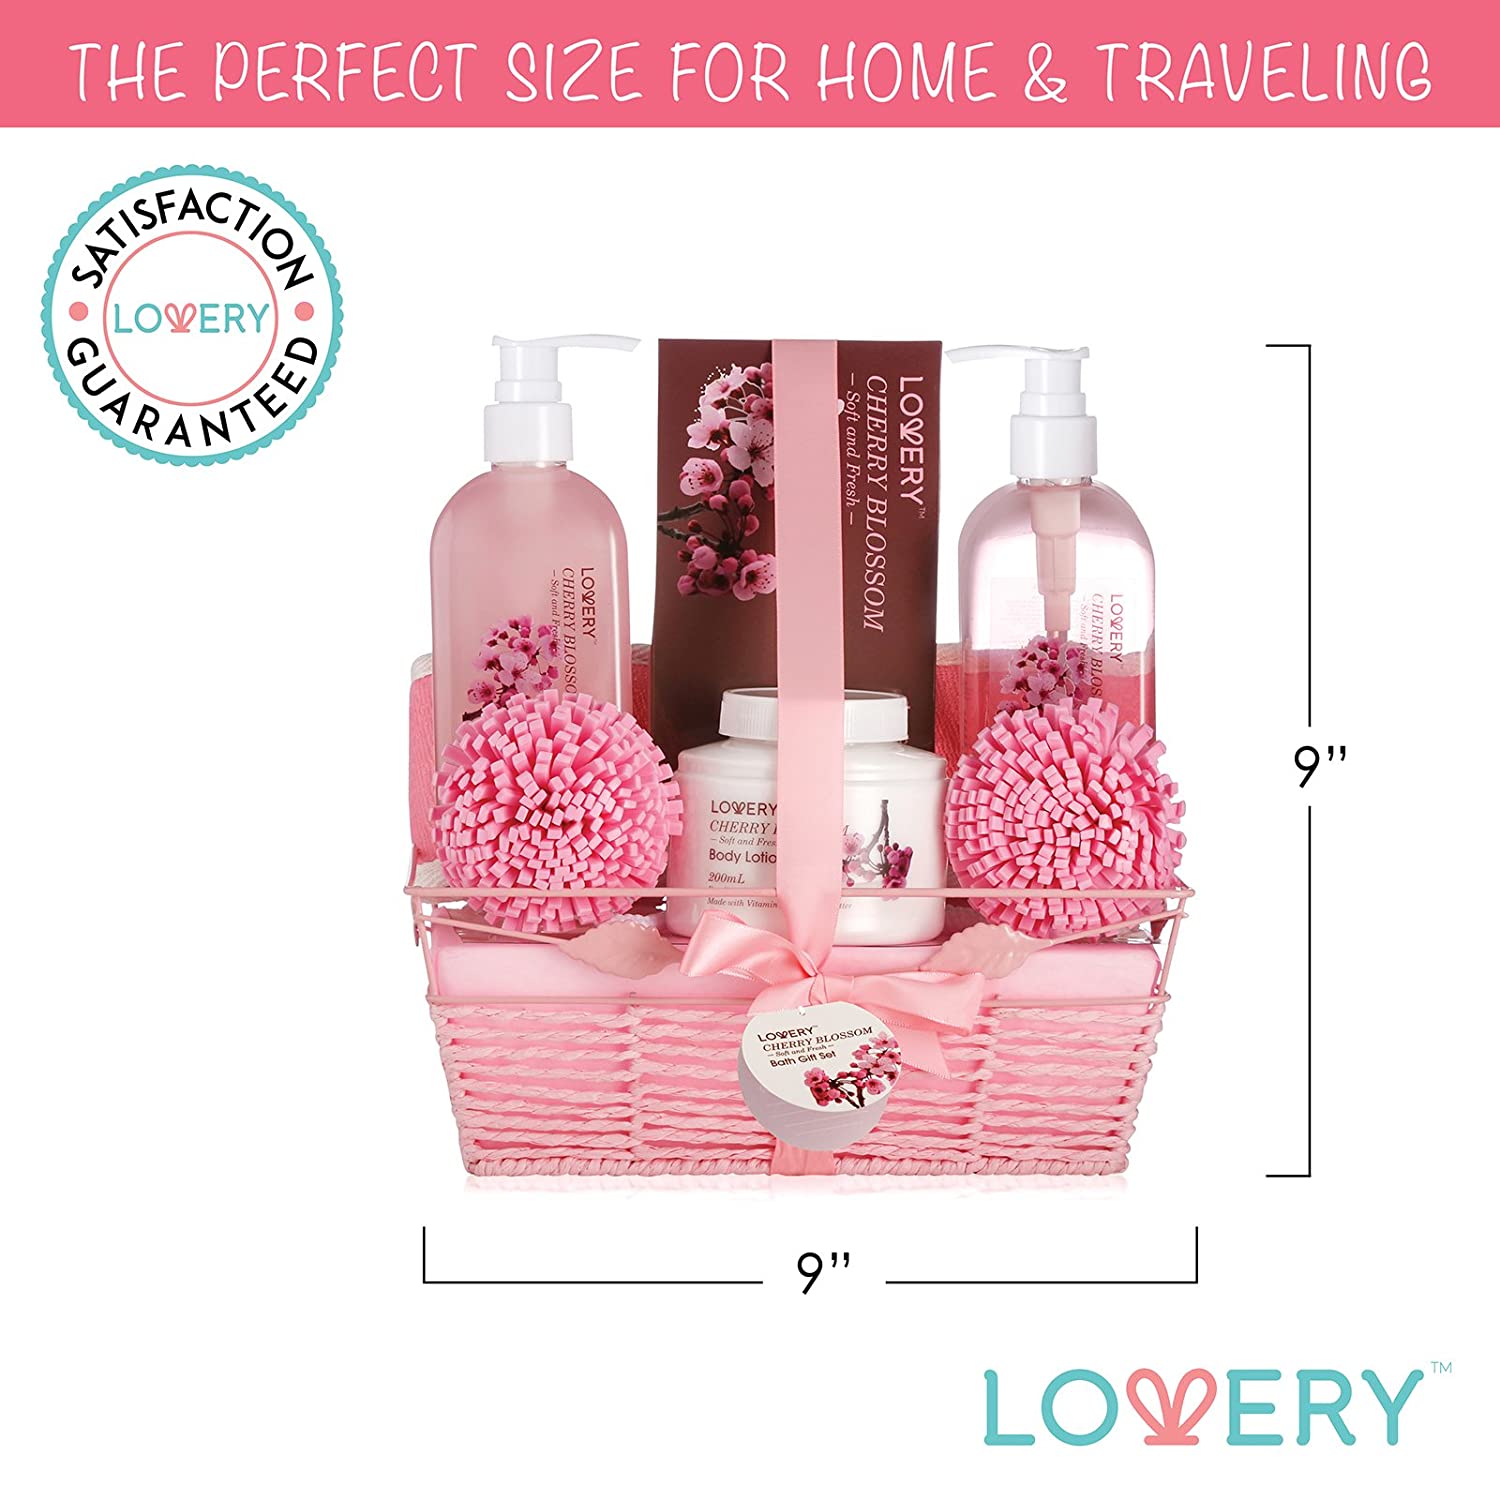 lovery home spa basket, home spa basket, Cherry Blossom Bath Set, chic cherry blossom spa basket, 7-piece cherry blossom spa kit, Shea-enriched bath set, Vitamin E infused spa products, Paraben-free cherry blossom set, luxurious cherry blossom spa essentials, gift-ready cherry blossom bath package, all-natural cherry blossom spa items, eco-friendly cherry blossom bath kit